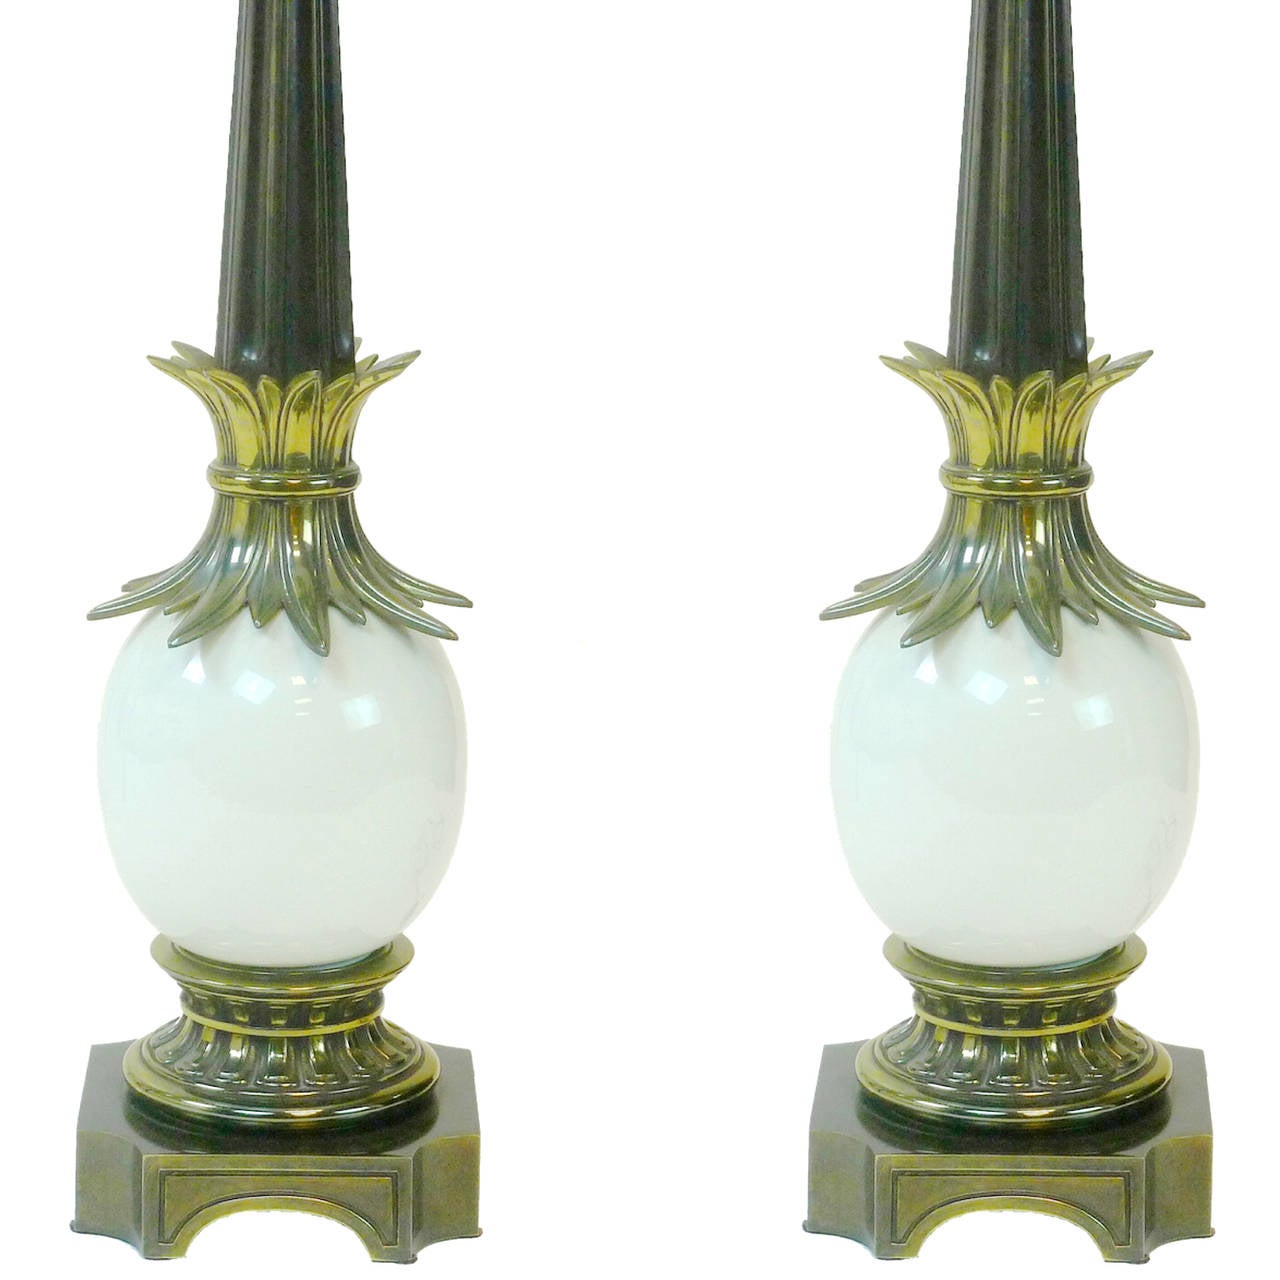 Hollywood Regency Pair of Regency Stiffel Ostrich Egg Lamps with Brass Sheaf of Wheat Details